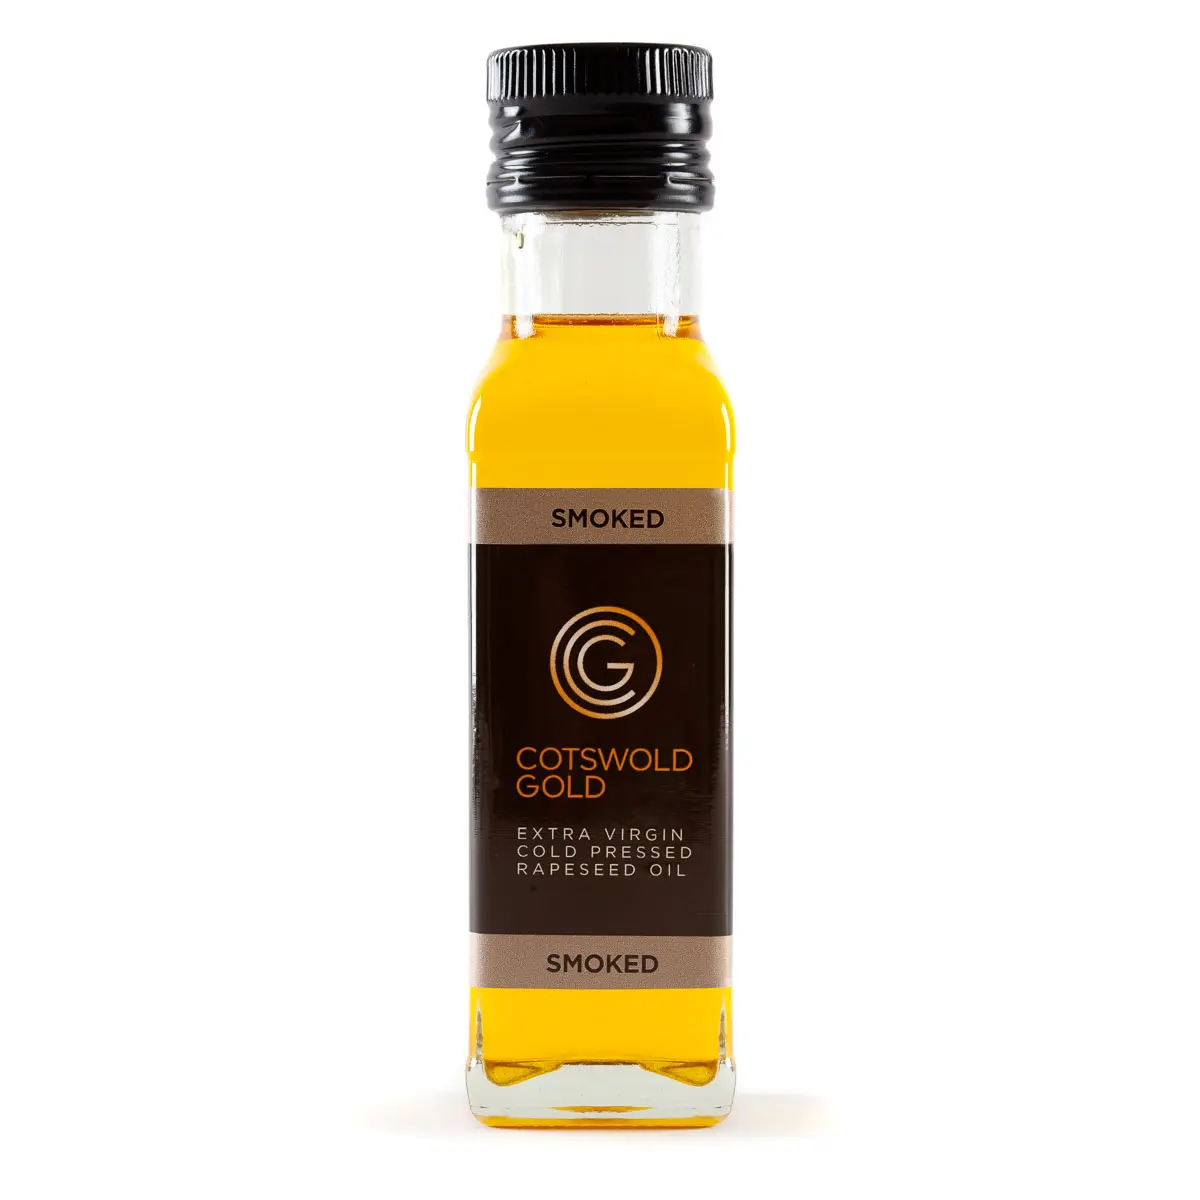 smoked rapeseed oil - Is rapeseed oil better than olive oil